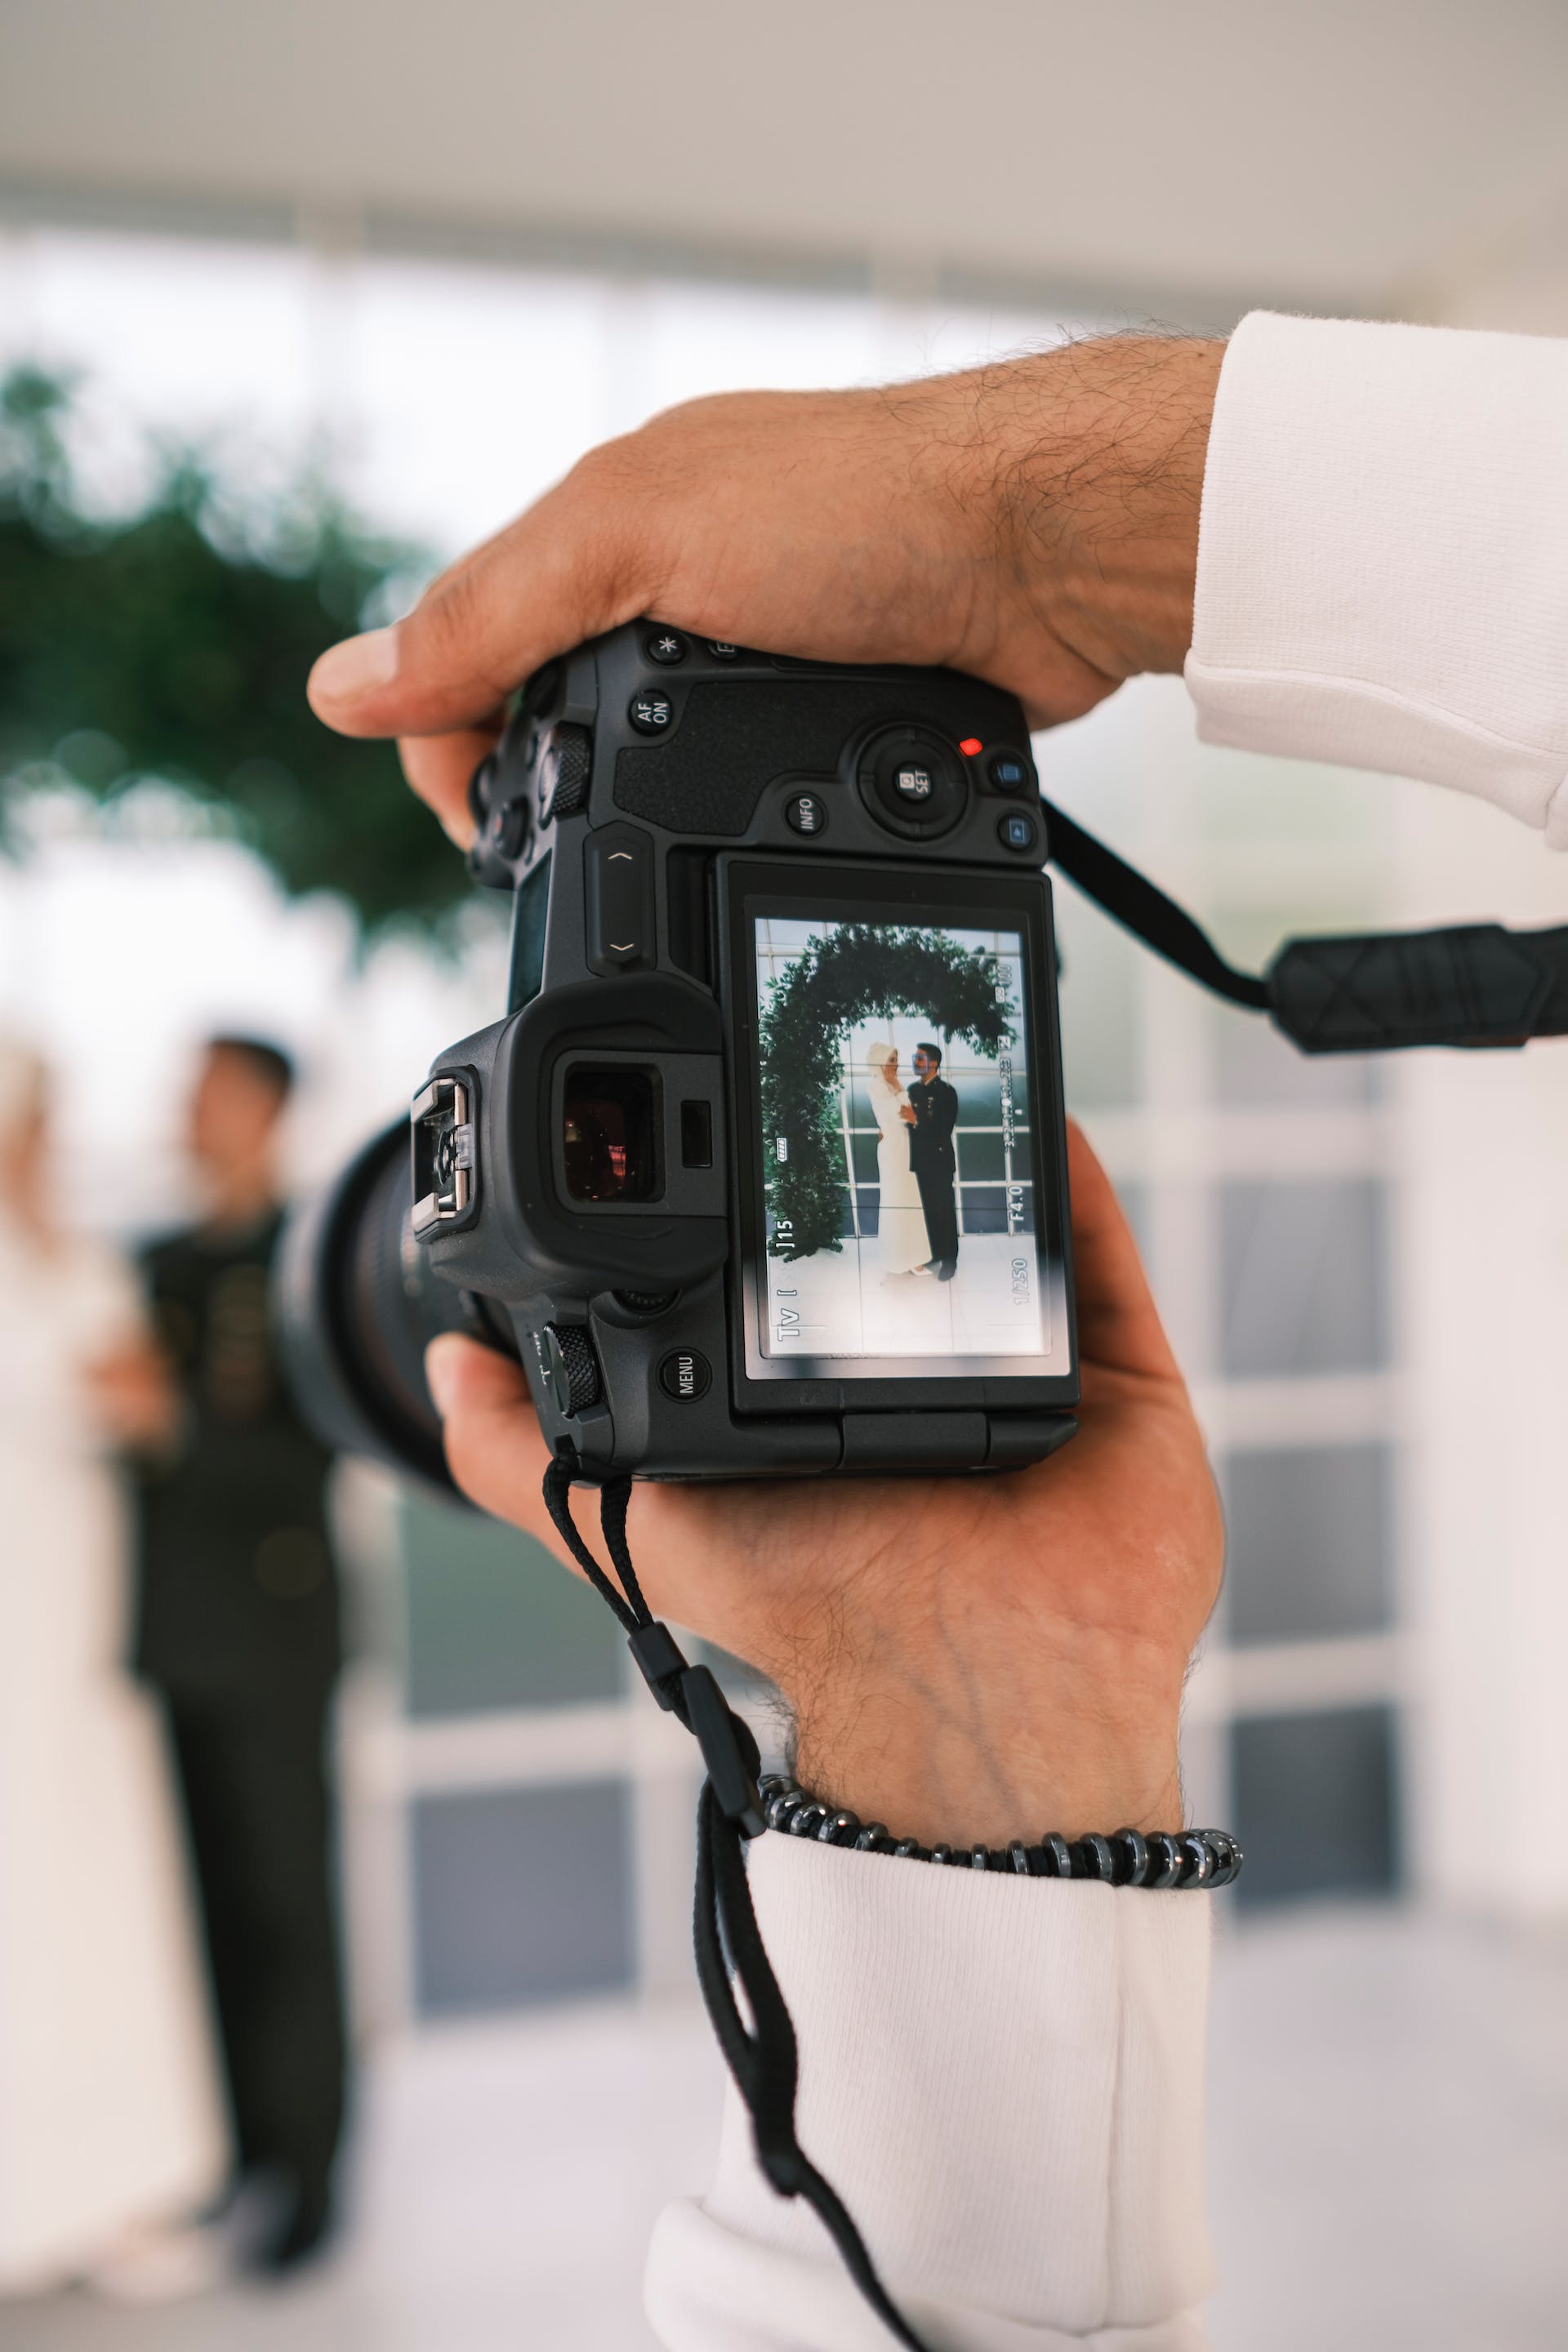 A photographer taking a couple's photo at their wedding | Source: Pexels